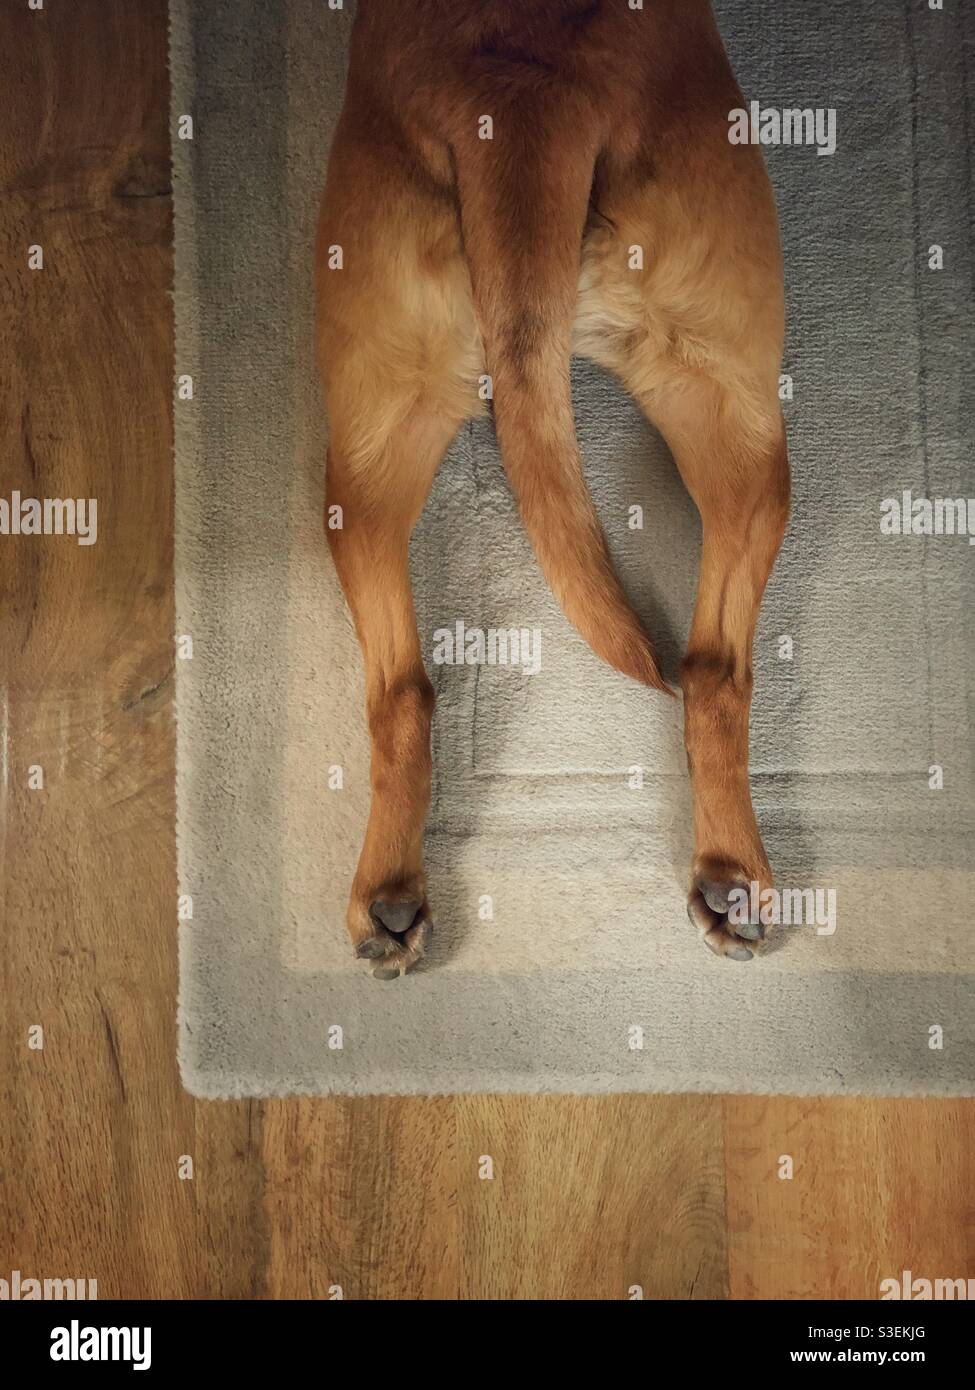 Looking down onto the outstretched hind legs of a pet dog in the sploot position with tail between legs Stock Photo